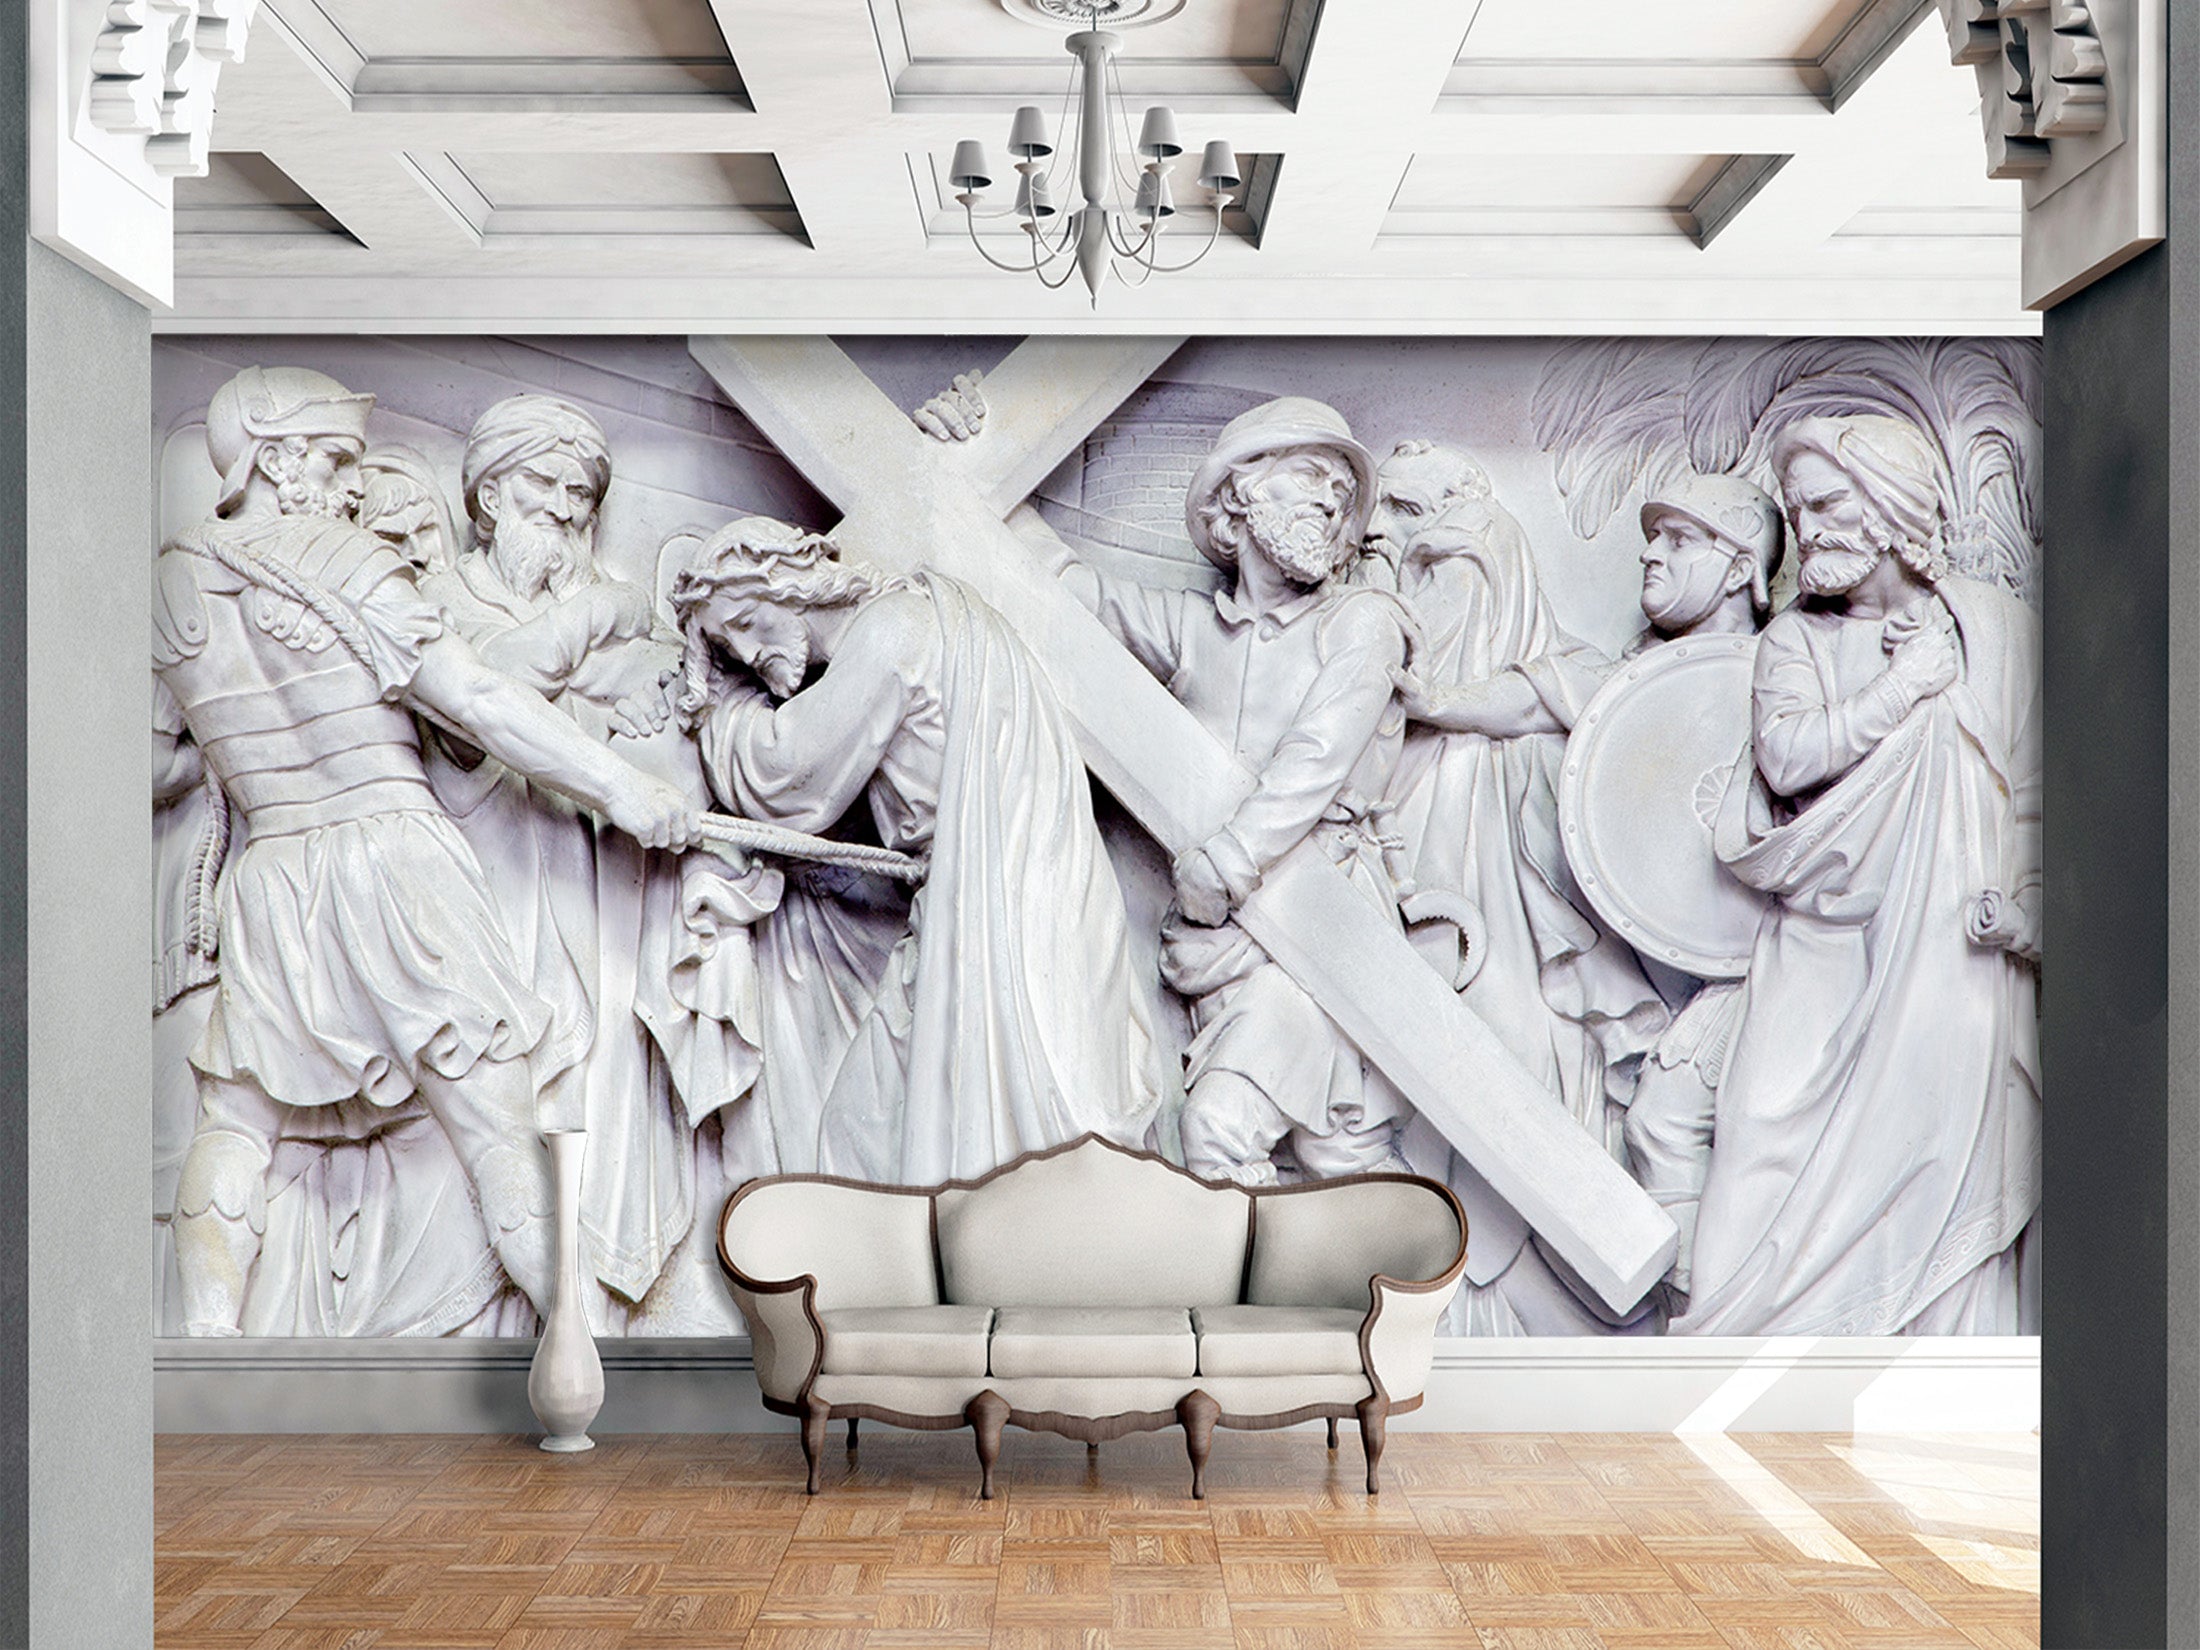 3D Carved Soldier 1530 Wall Murals